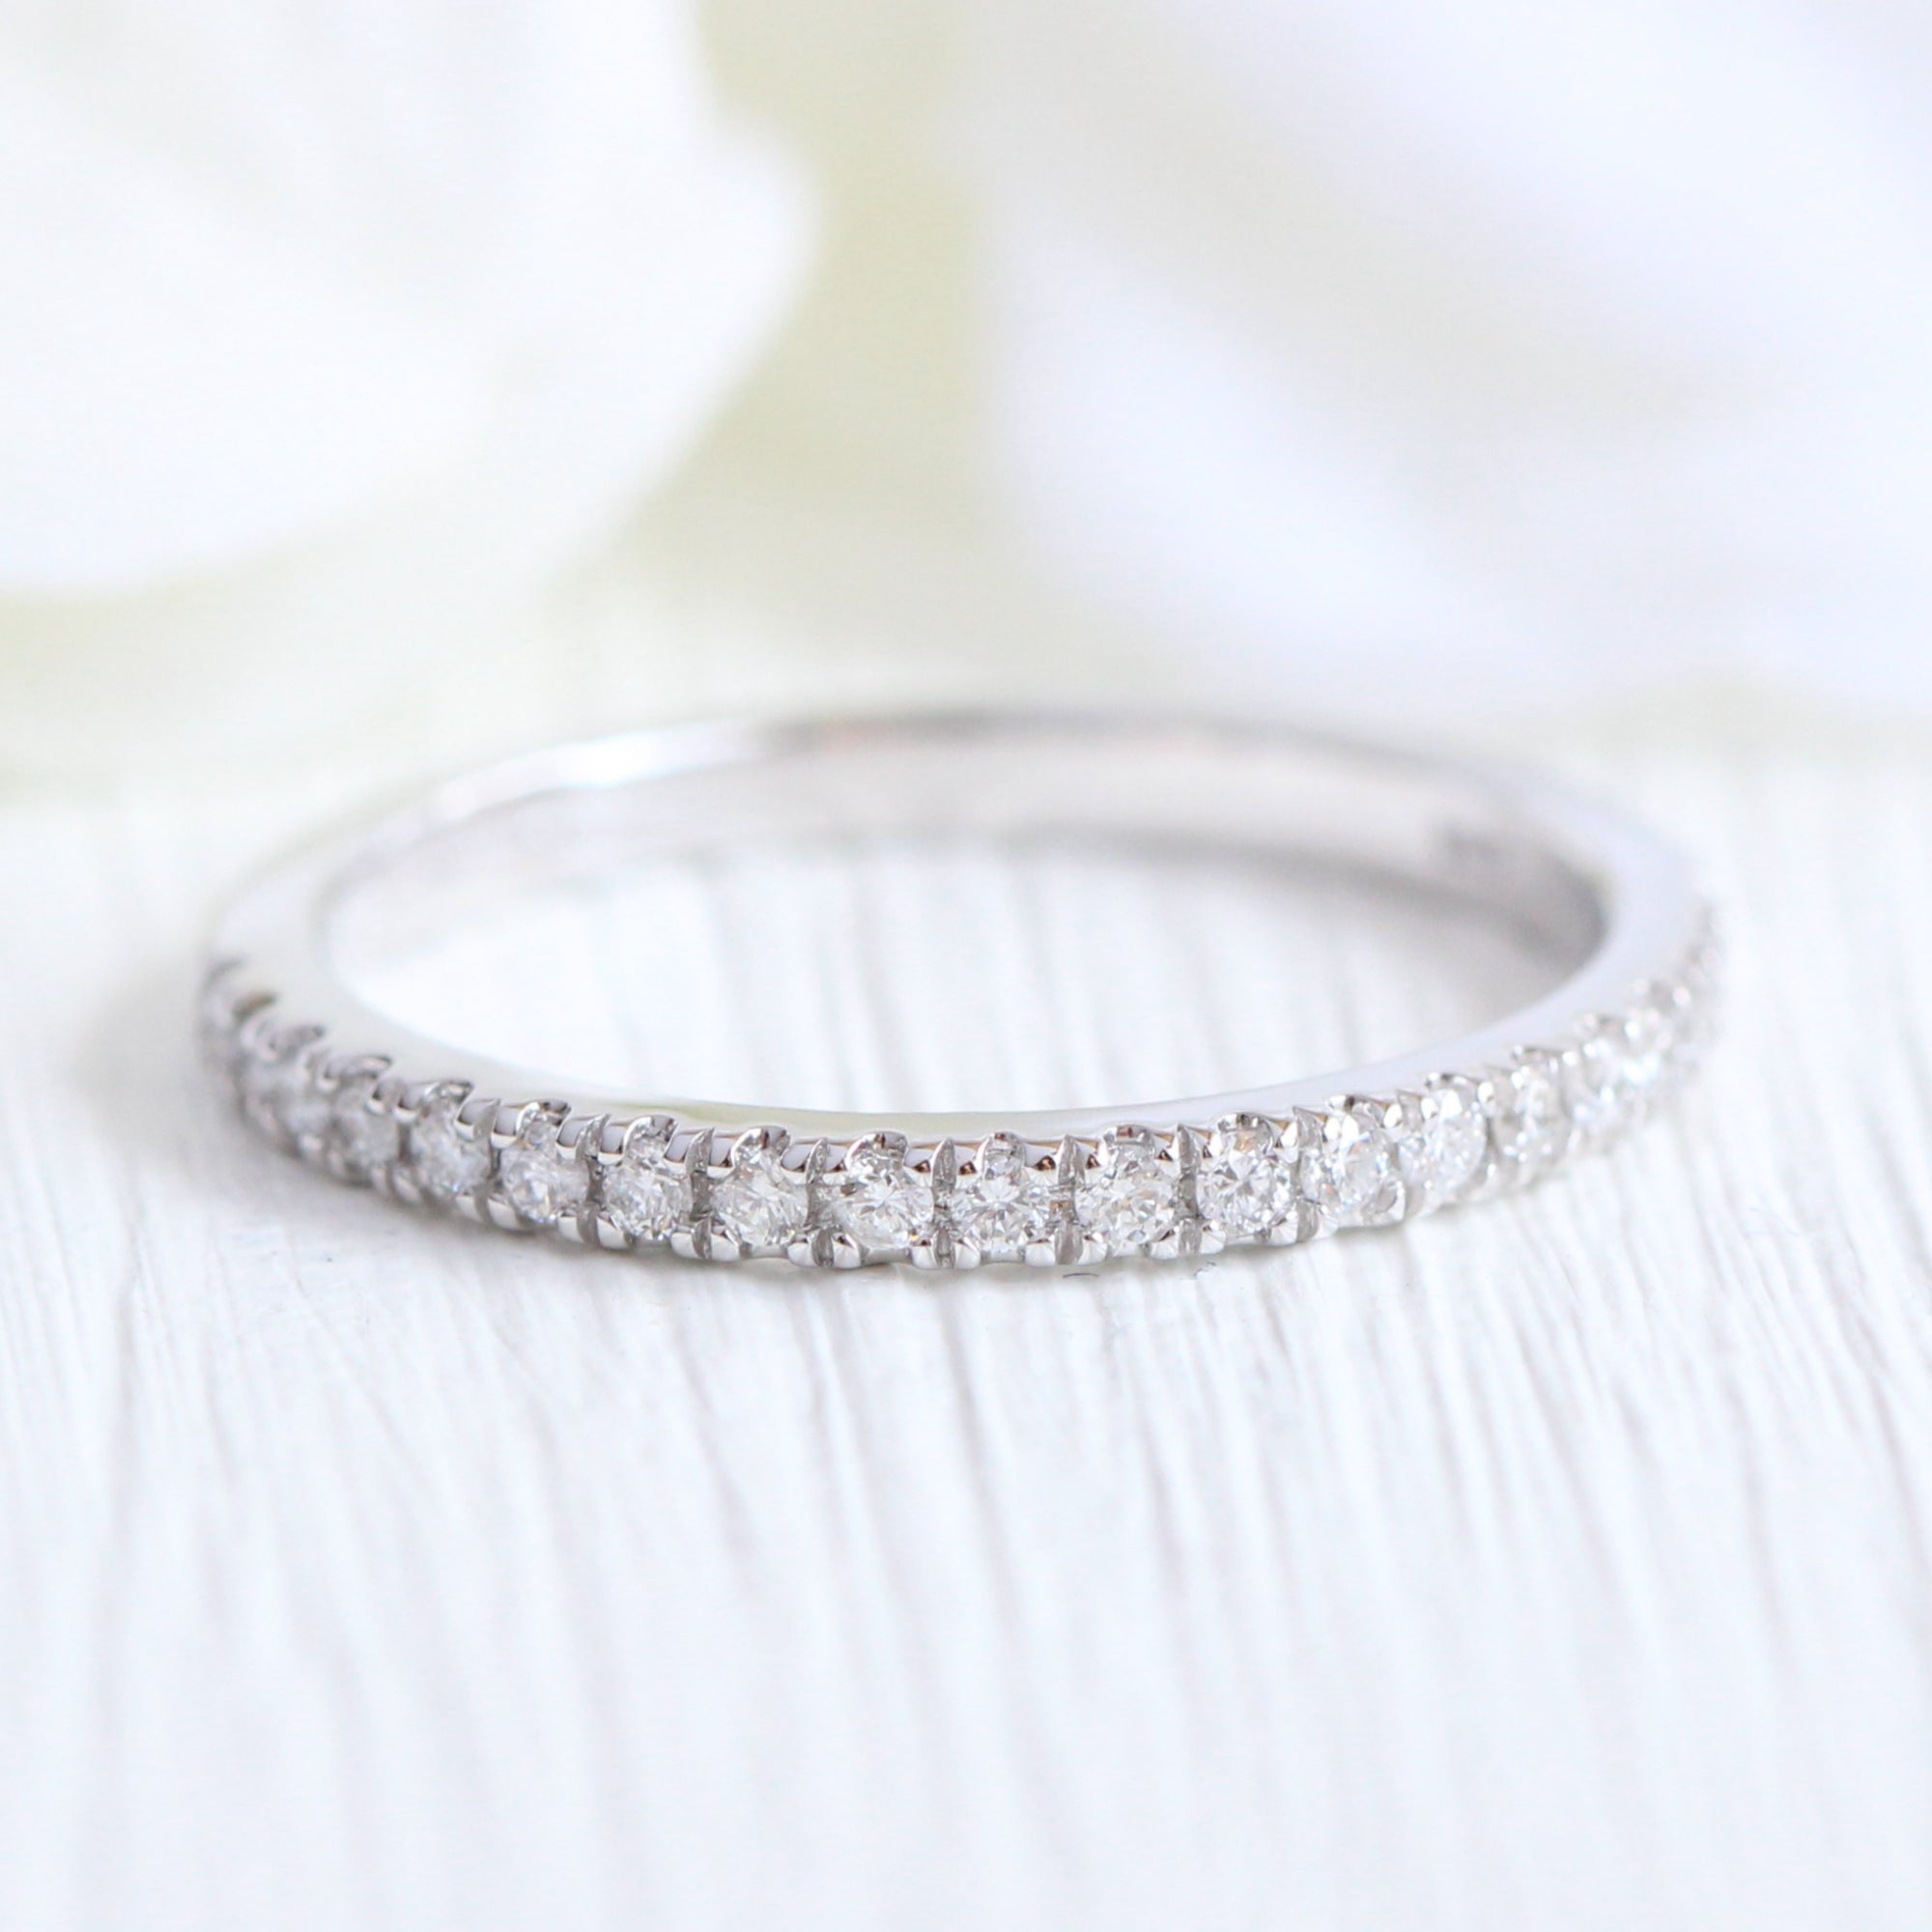 Pave Diamond Wedding Ring in Gold or Platinum Half Eternity Band